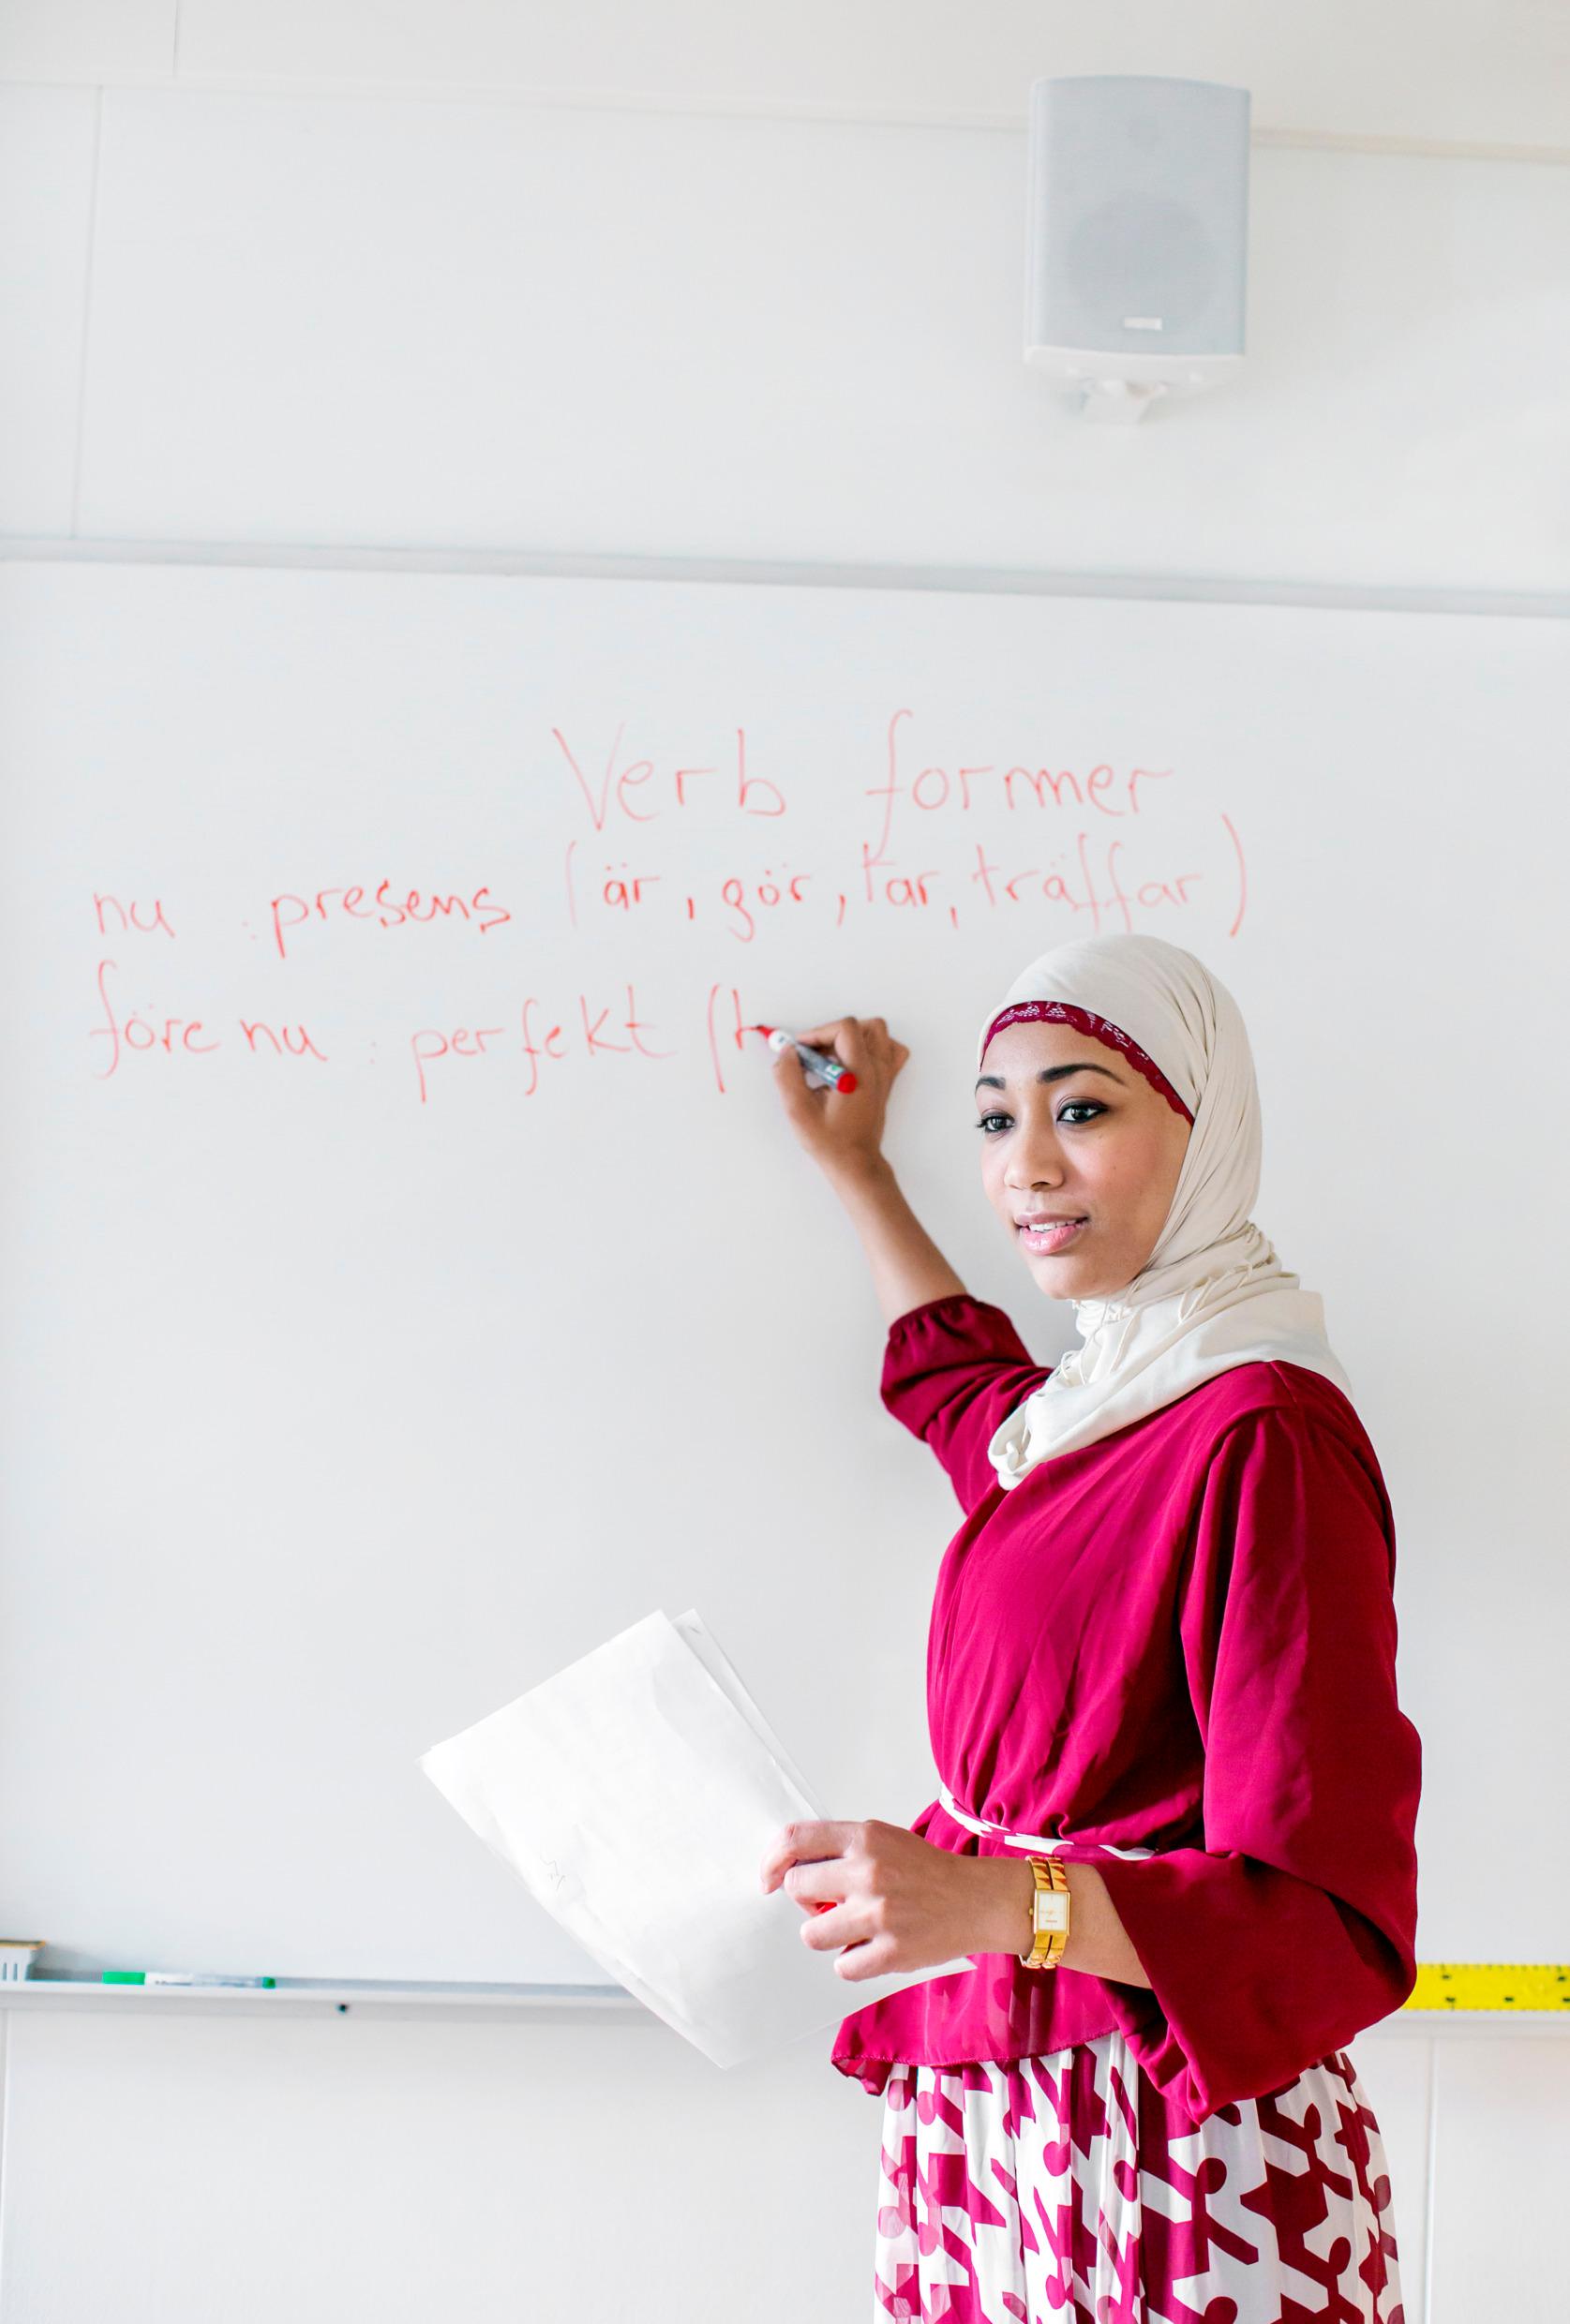 A woman standing by a whiteboard, writing words in Swedish.